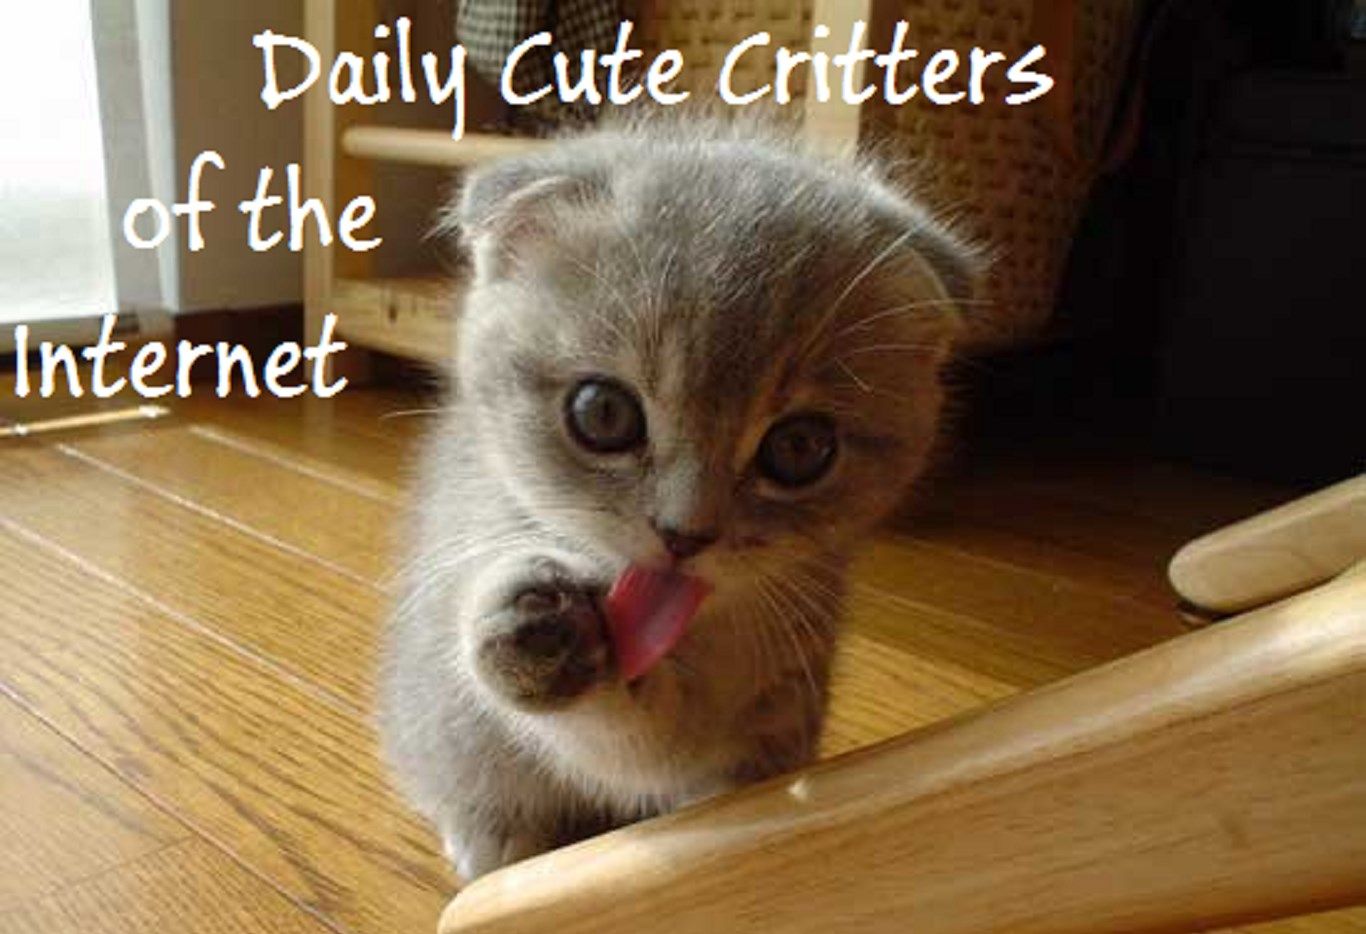 Does your day need more kittens? You can expect to see lots more of these!